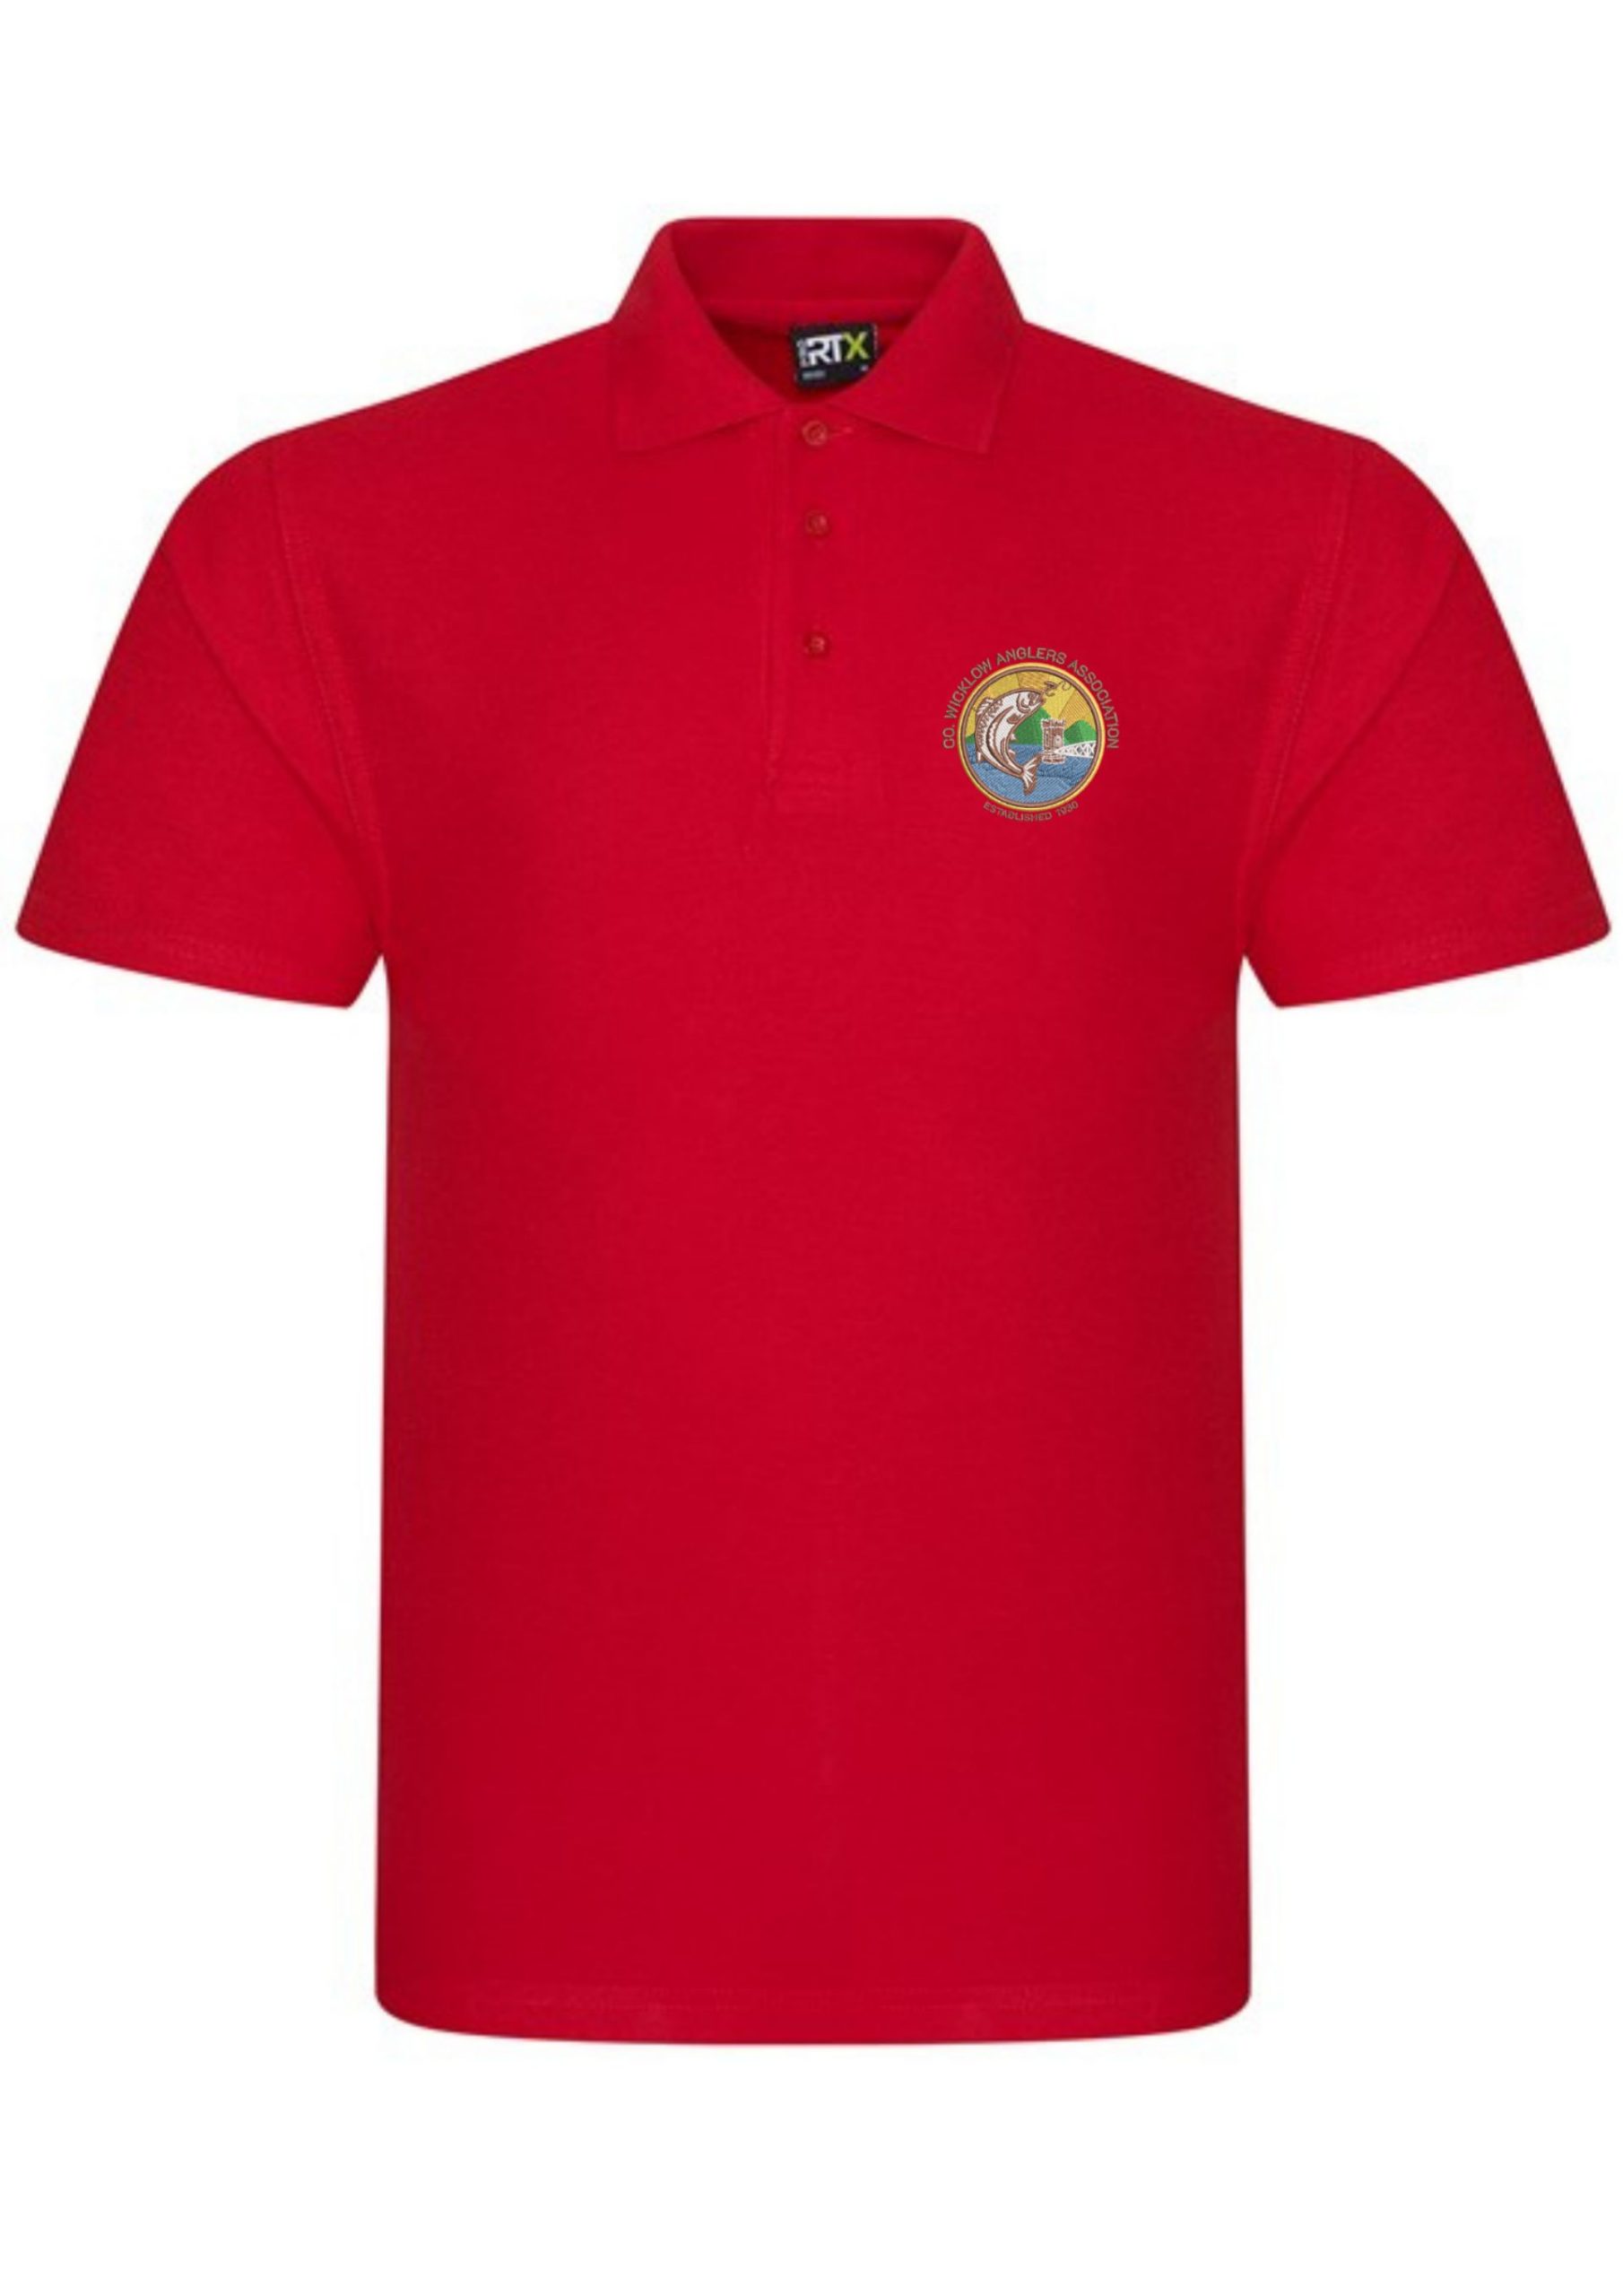 CWAA1RX101_Polo_Shirt_Red